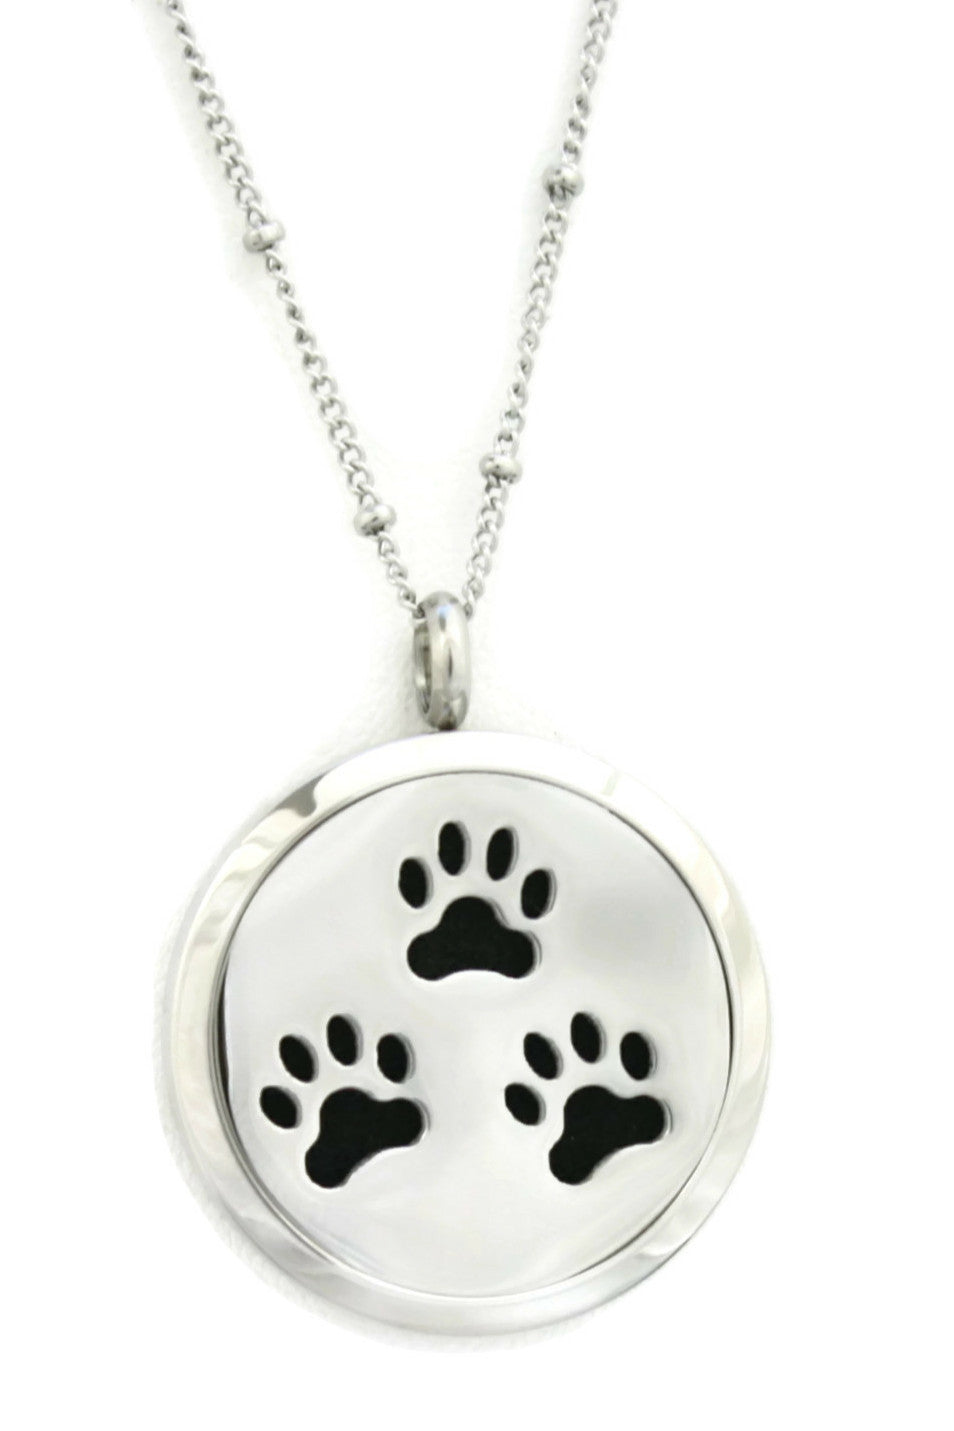 Paw-some Stainless Steel Essential Oil Diffuser Necklace- 30mm- 20"-Diffuser Necklace-Destination Oils